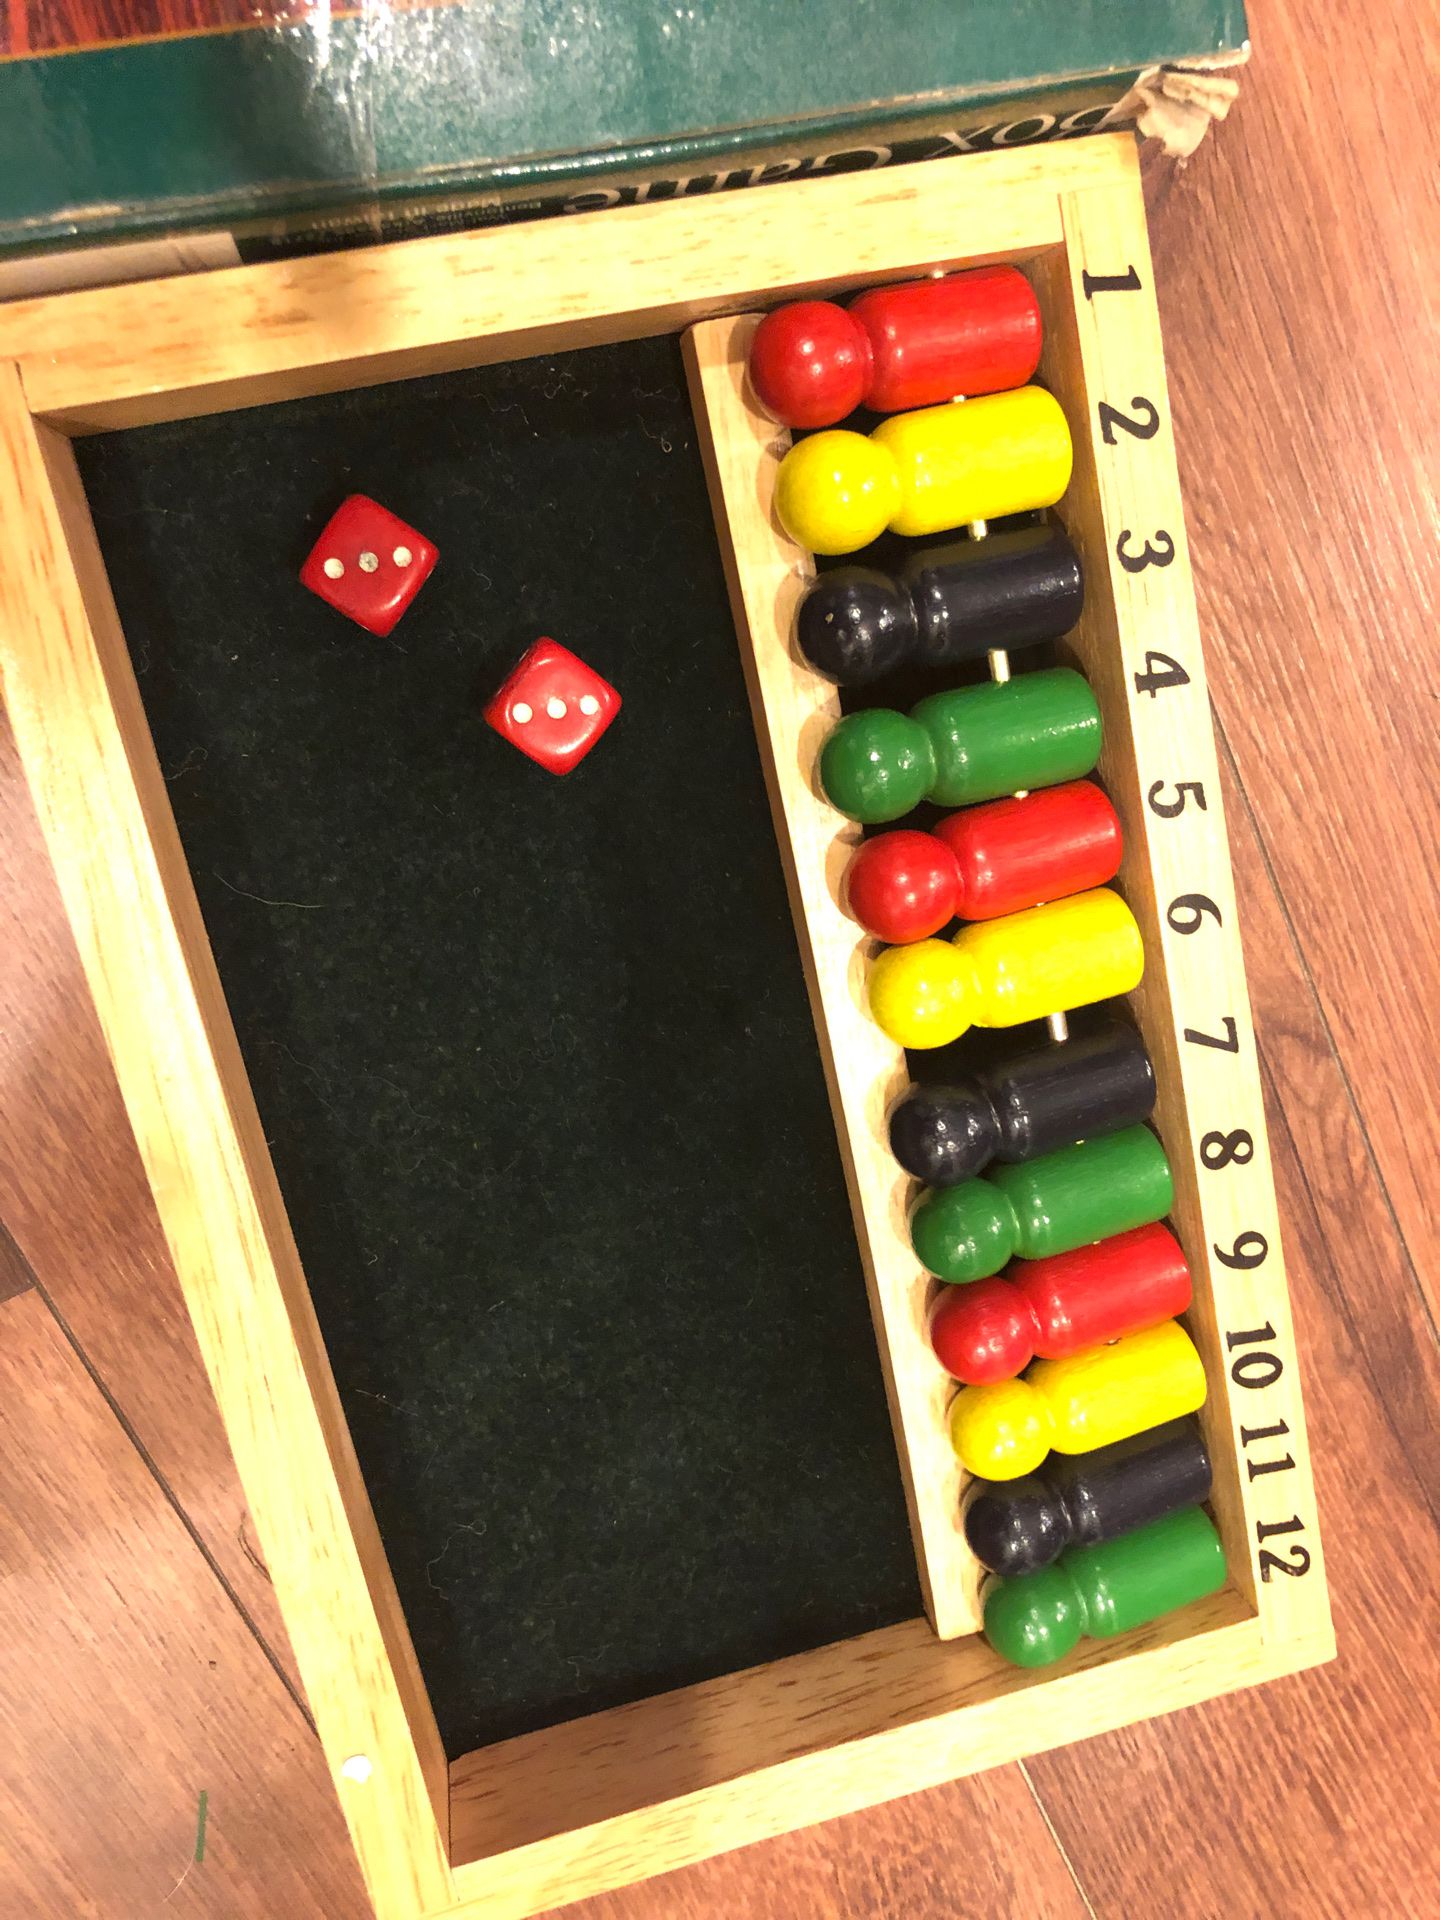 New Shut the box wooden game - teaches numbers, addition. Gift. Toy. Drinking game